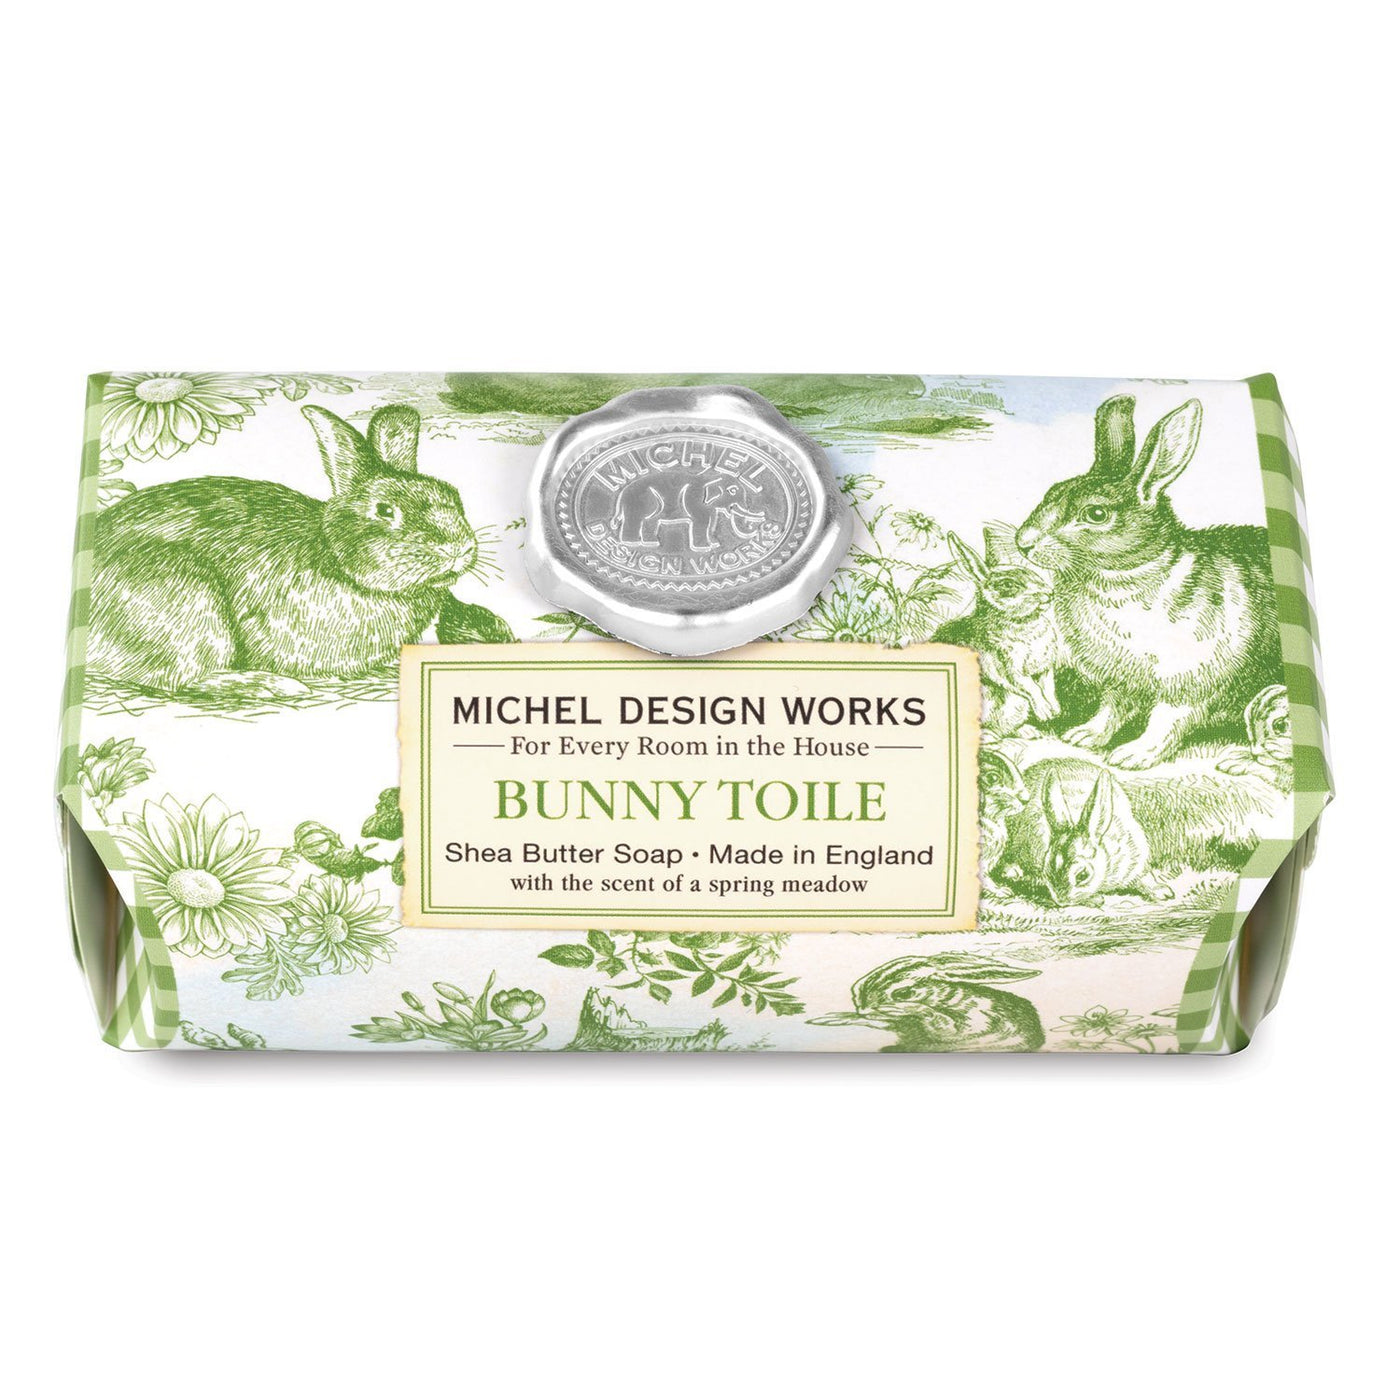 Bunny Toile Large Bath Soap Bar by Michel Design Works